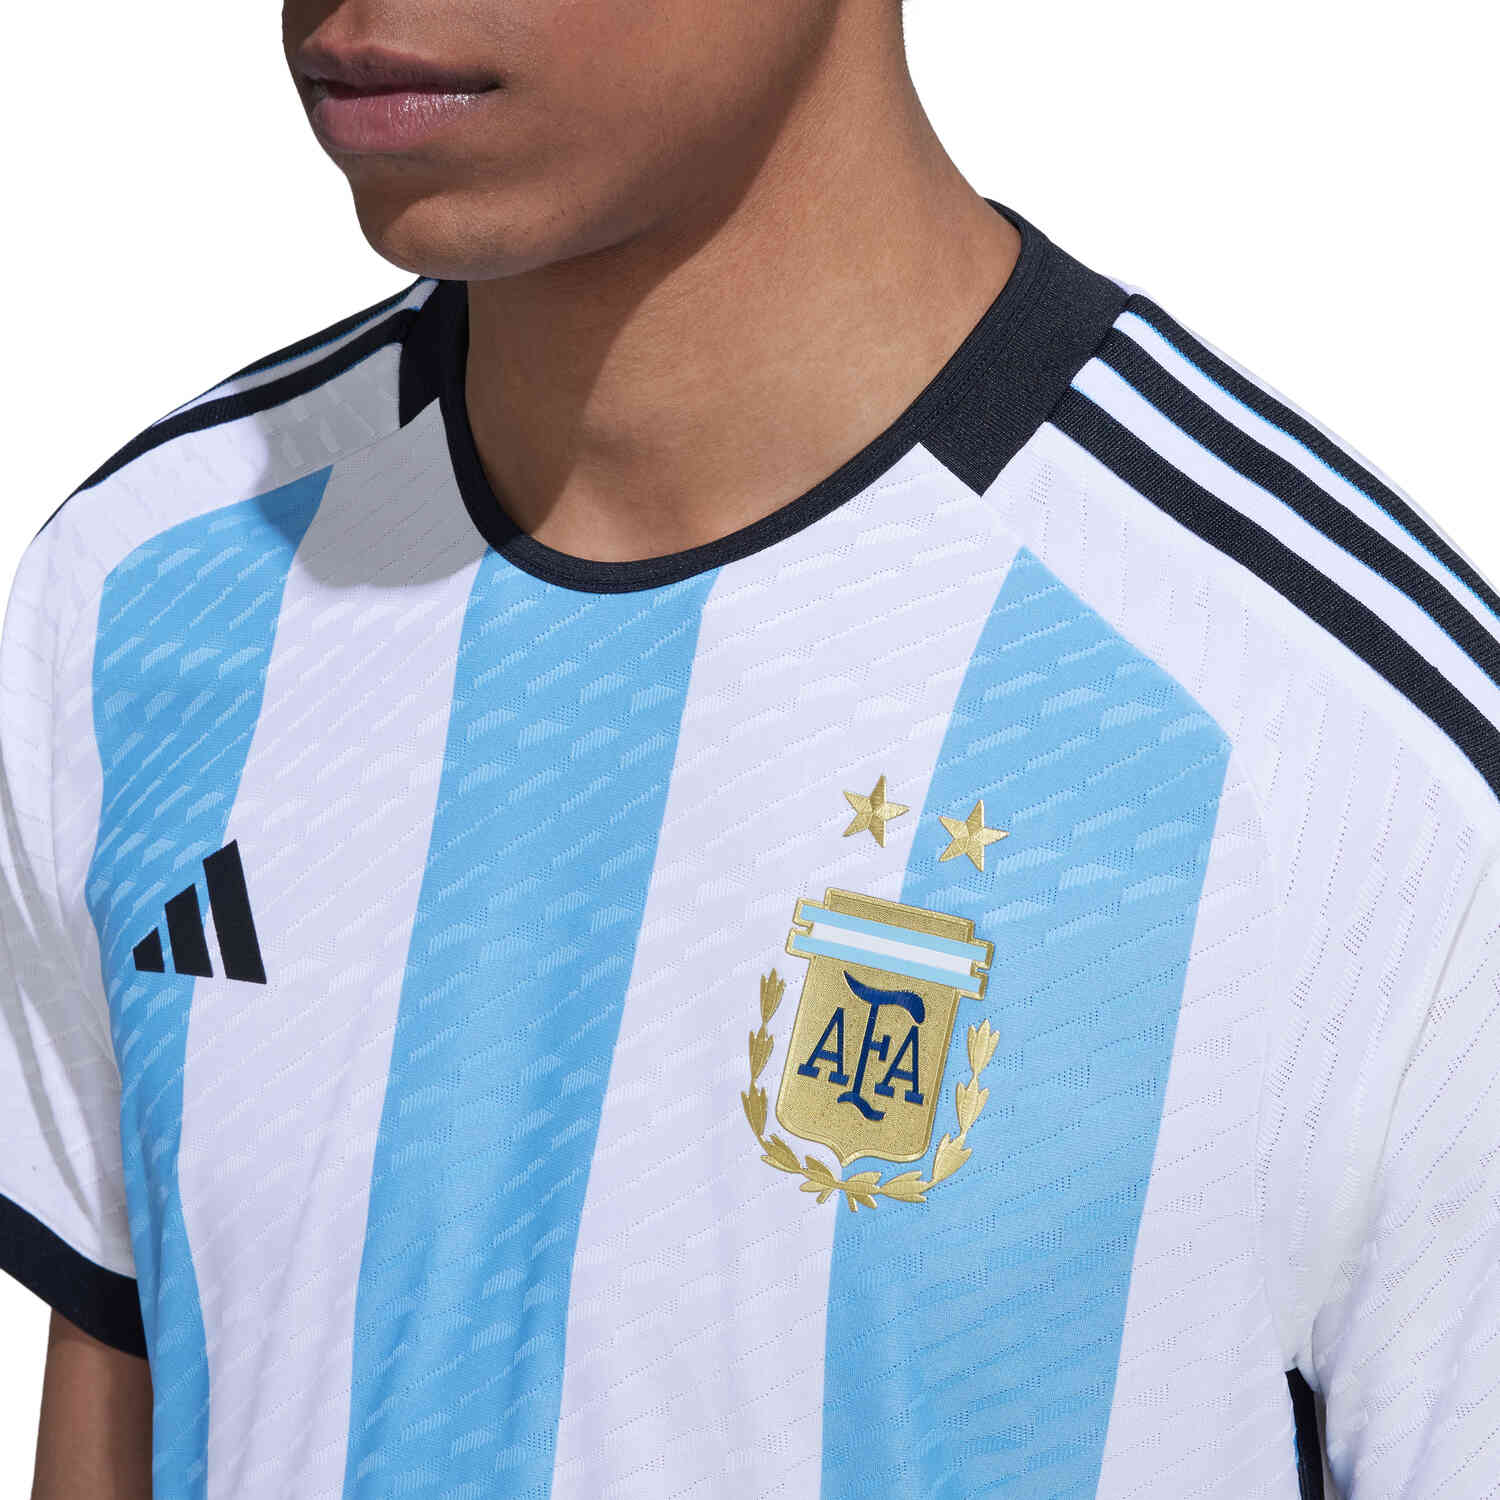 official argentina messi jersey